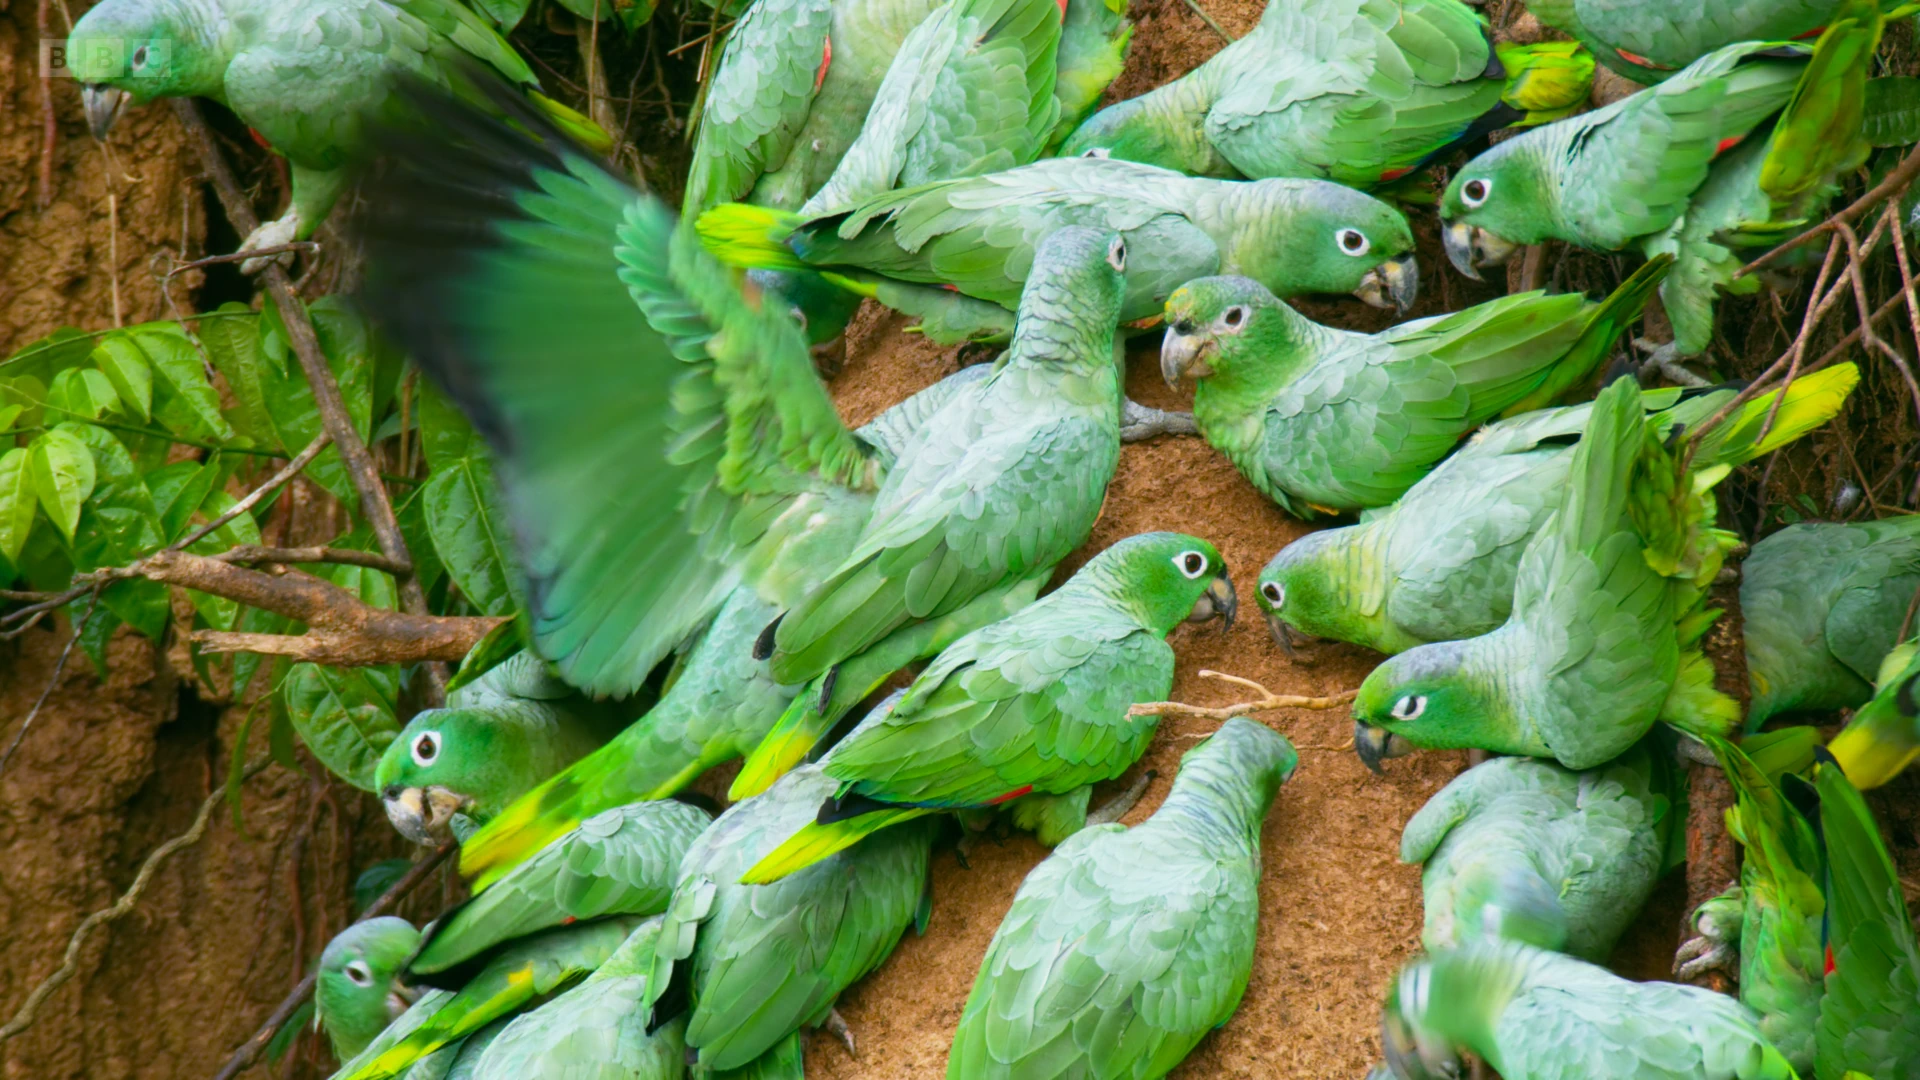 Southern mealy parrot (Amazona farinosa) as shown in Seven Worlds, One Planet - South America